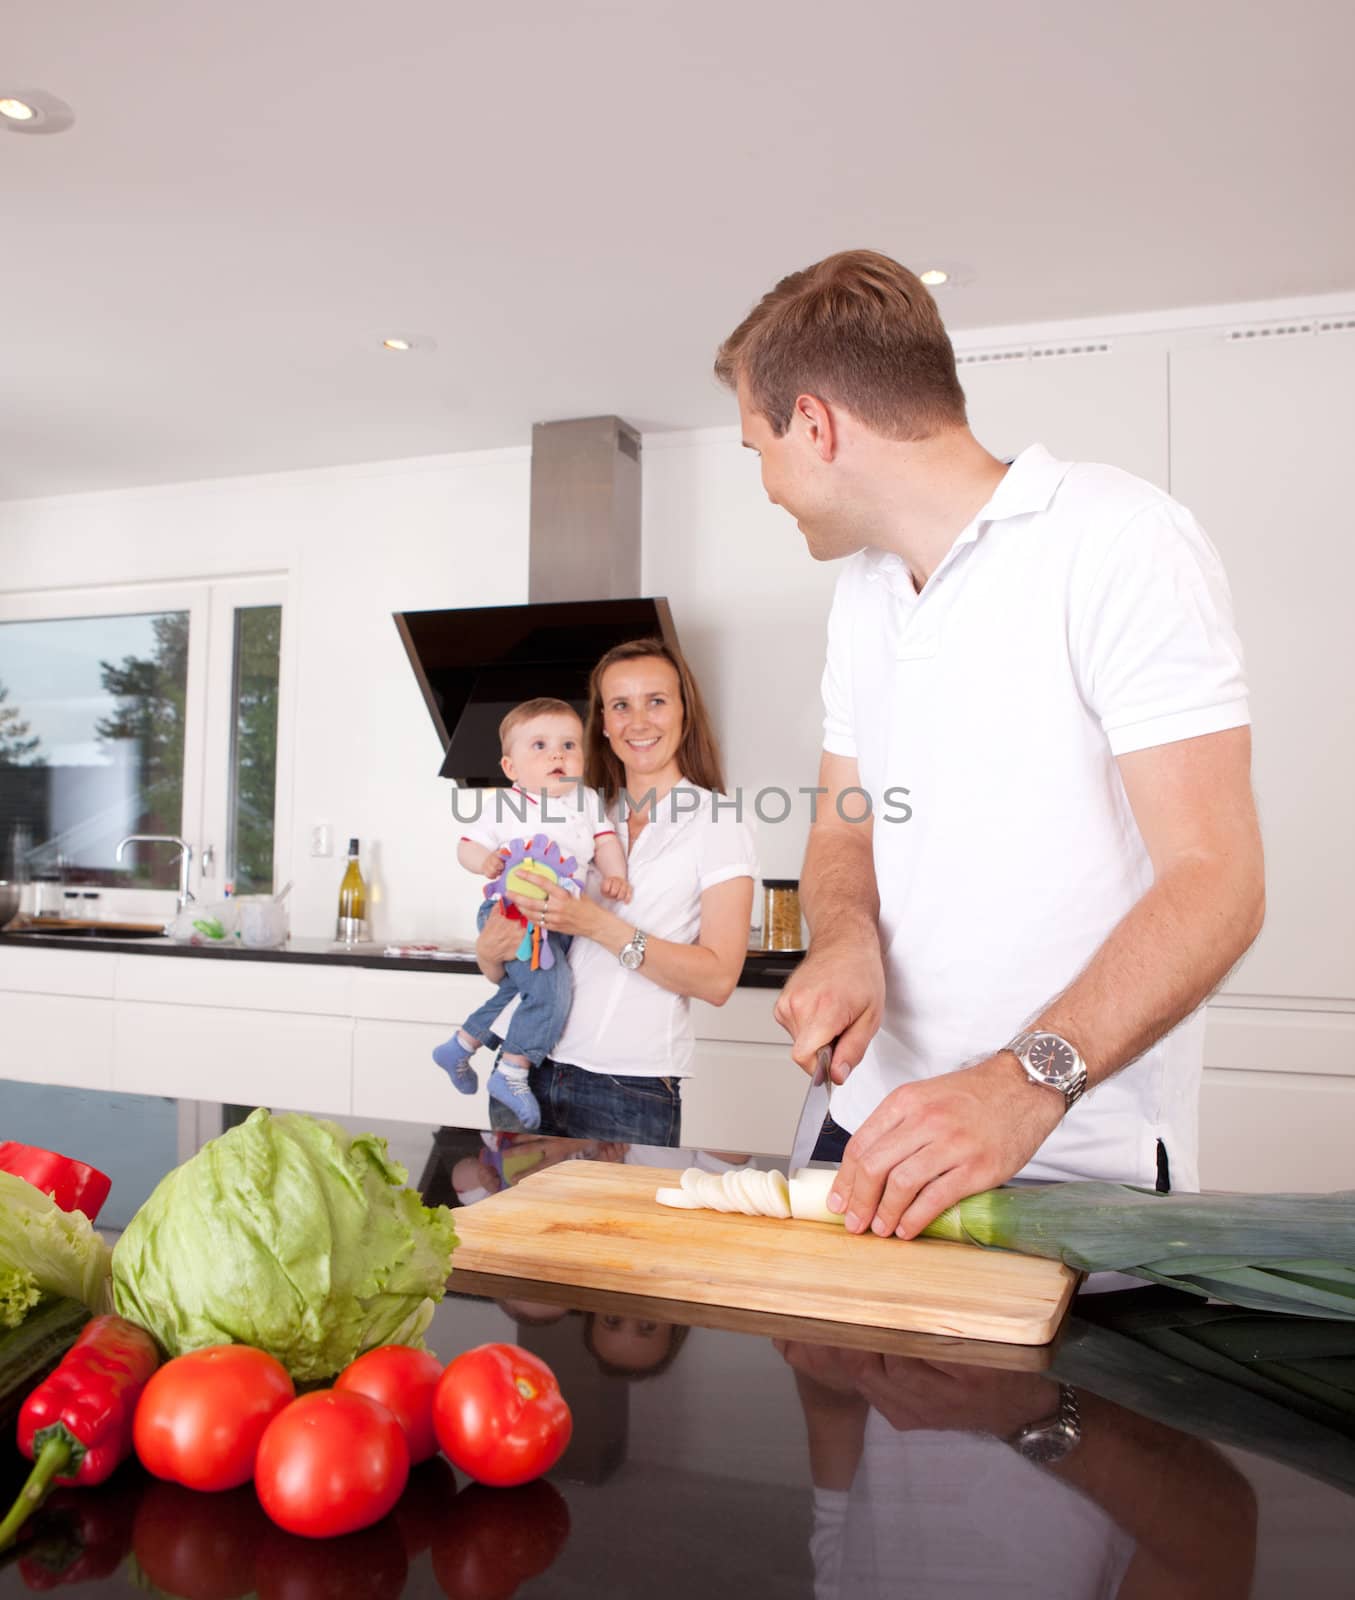 Family Together in Kitchen by leaf